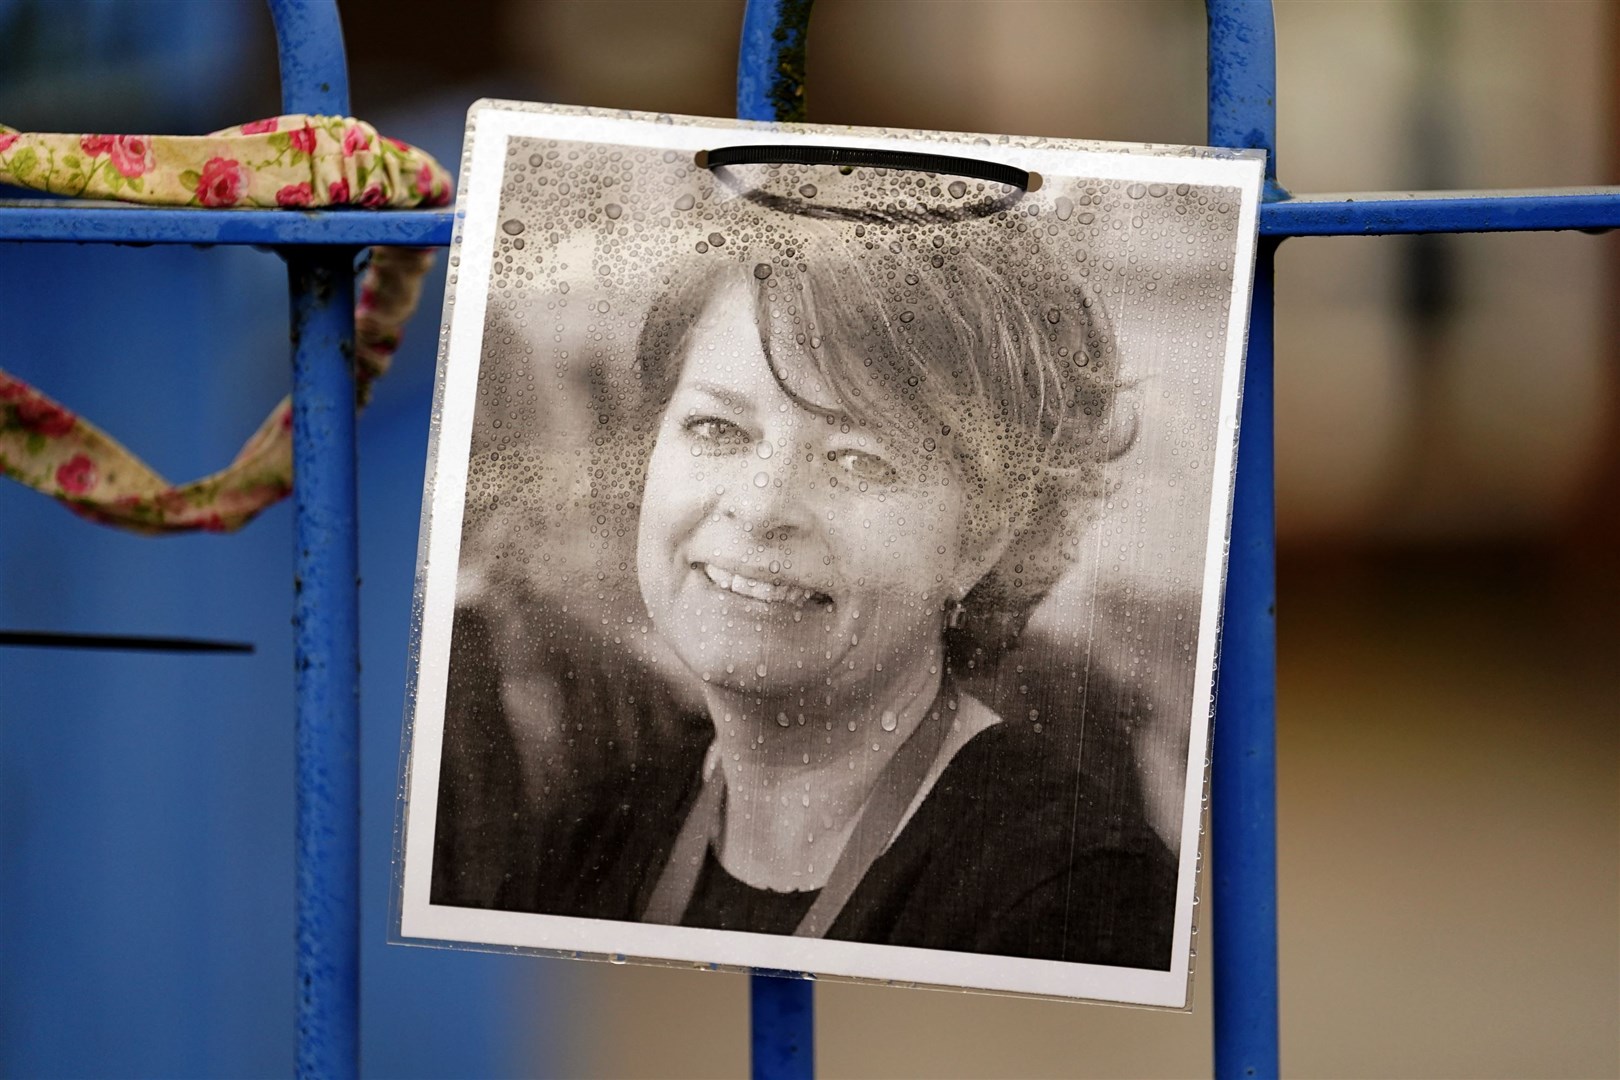 A photograph of headteacher Ruth Perry attached to the railings of John Rankin Schools in Newbury, Berkshire (Andrew Matthews/PA)